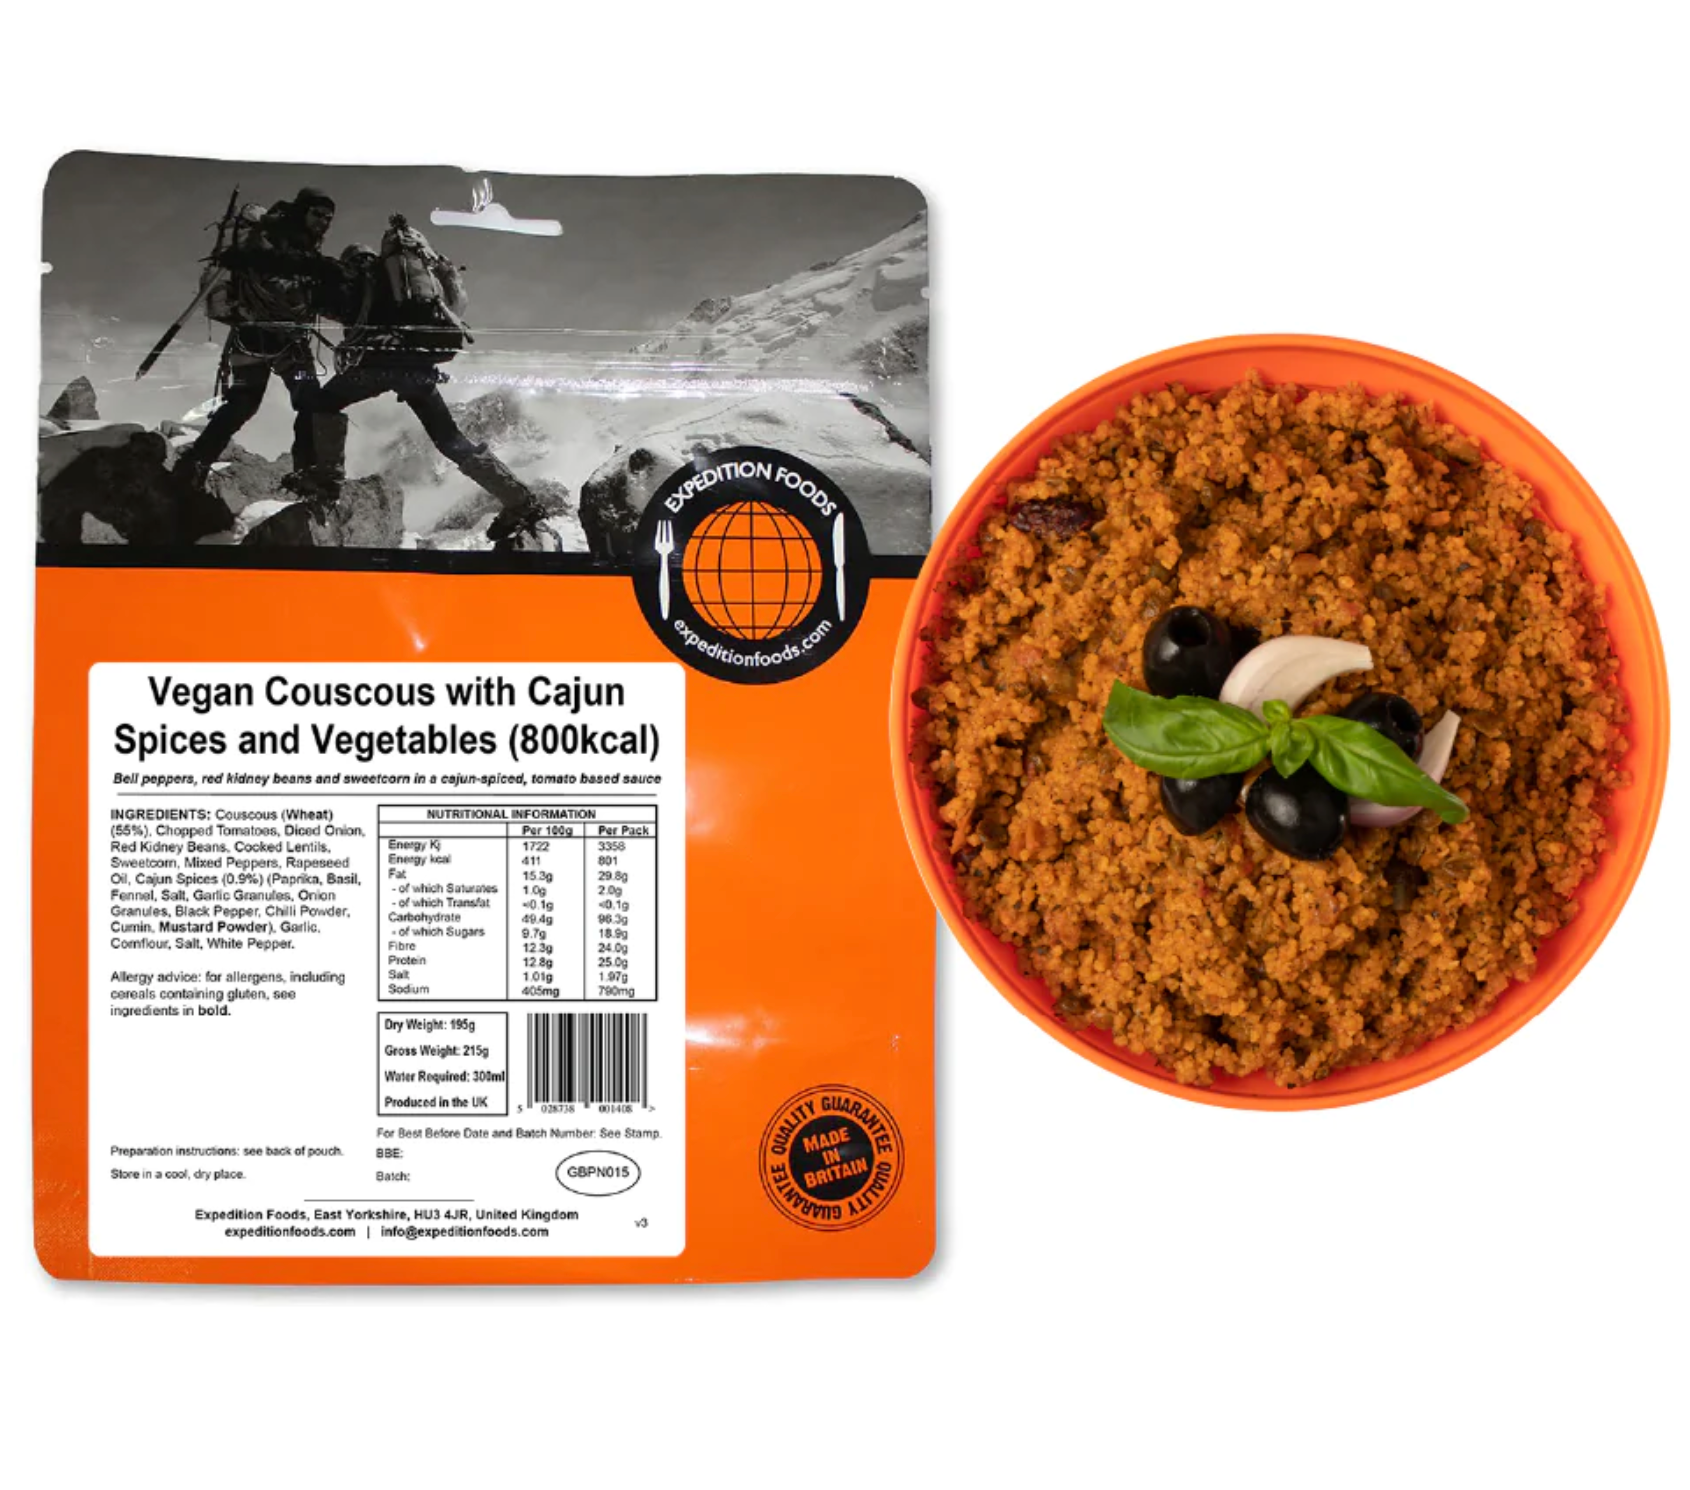 Expedition Foods Vegan Couscous with Cajun Spices 800KCAL